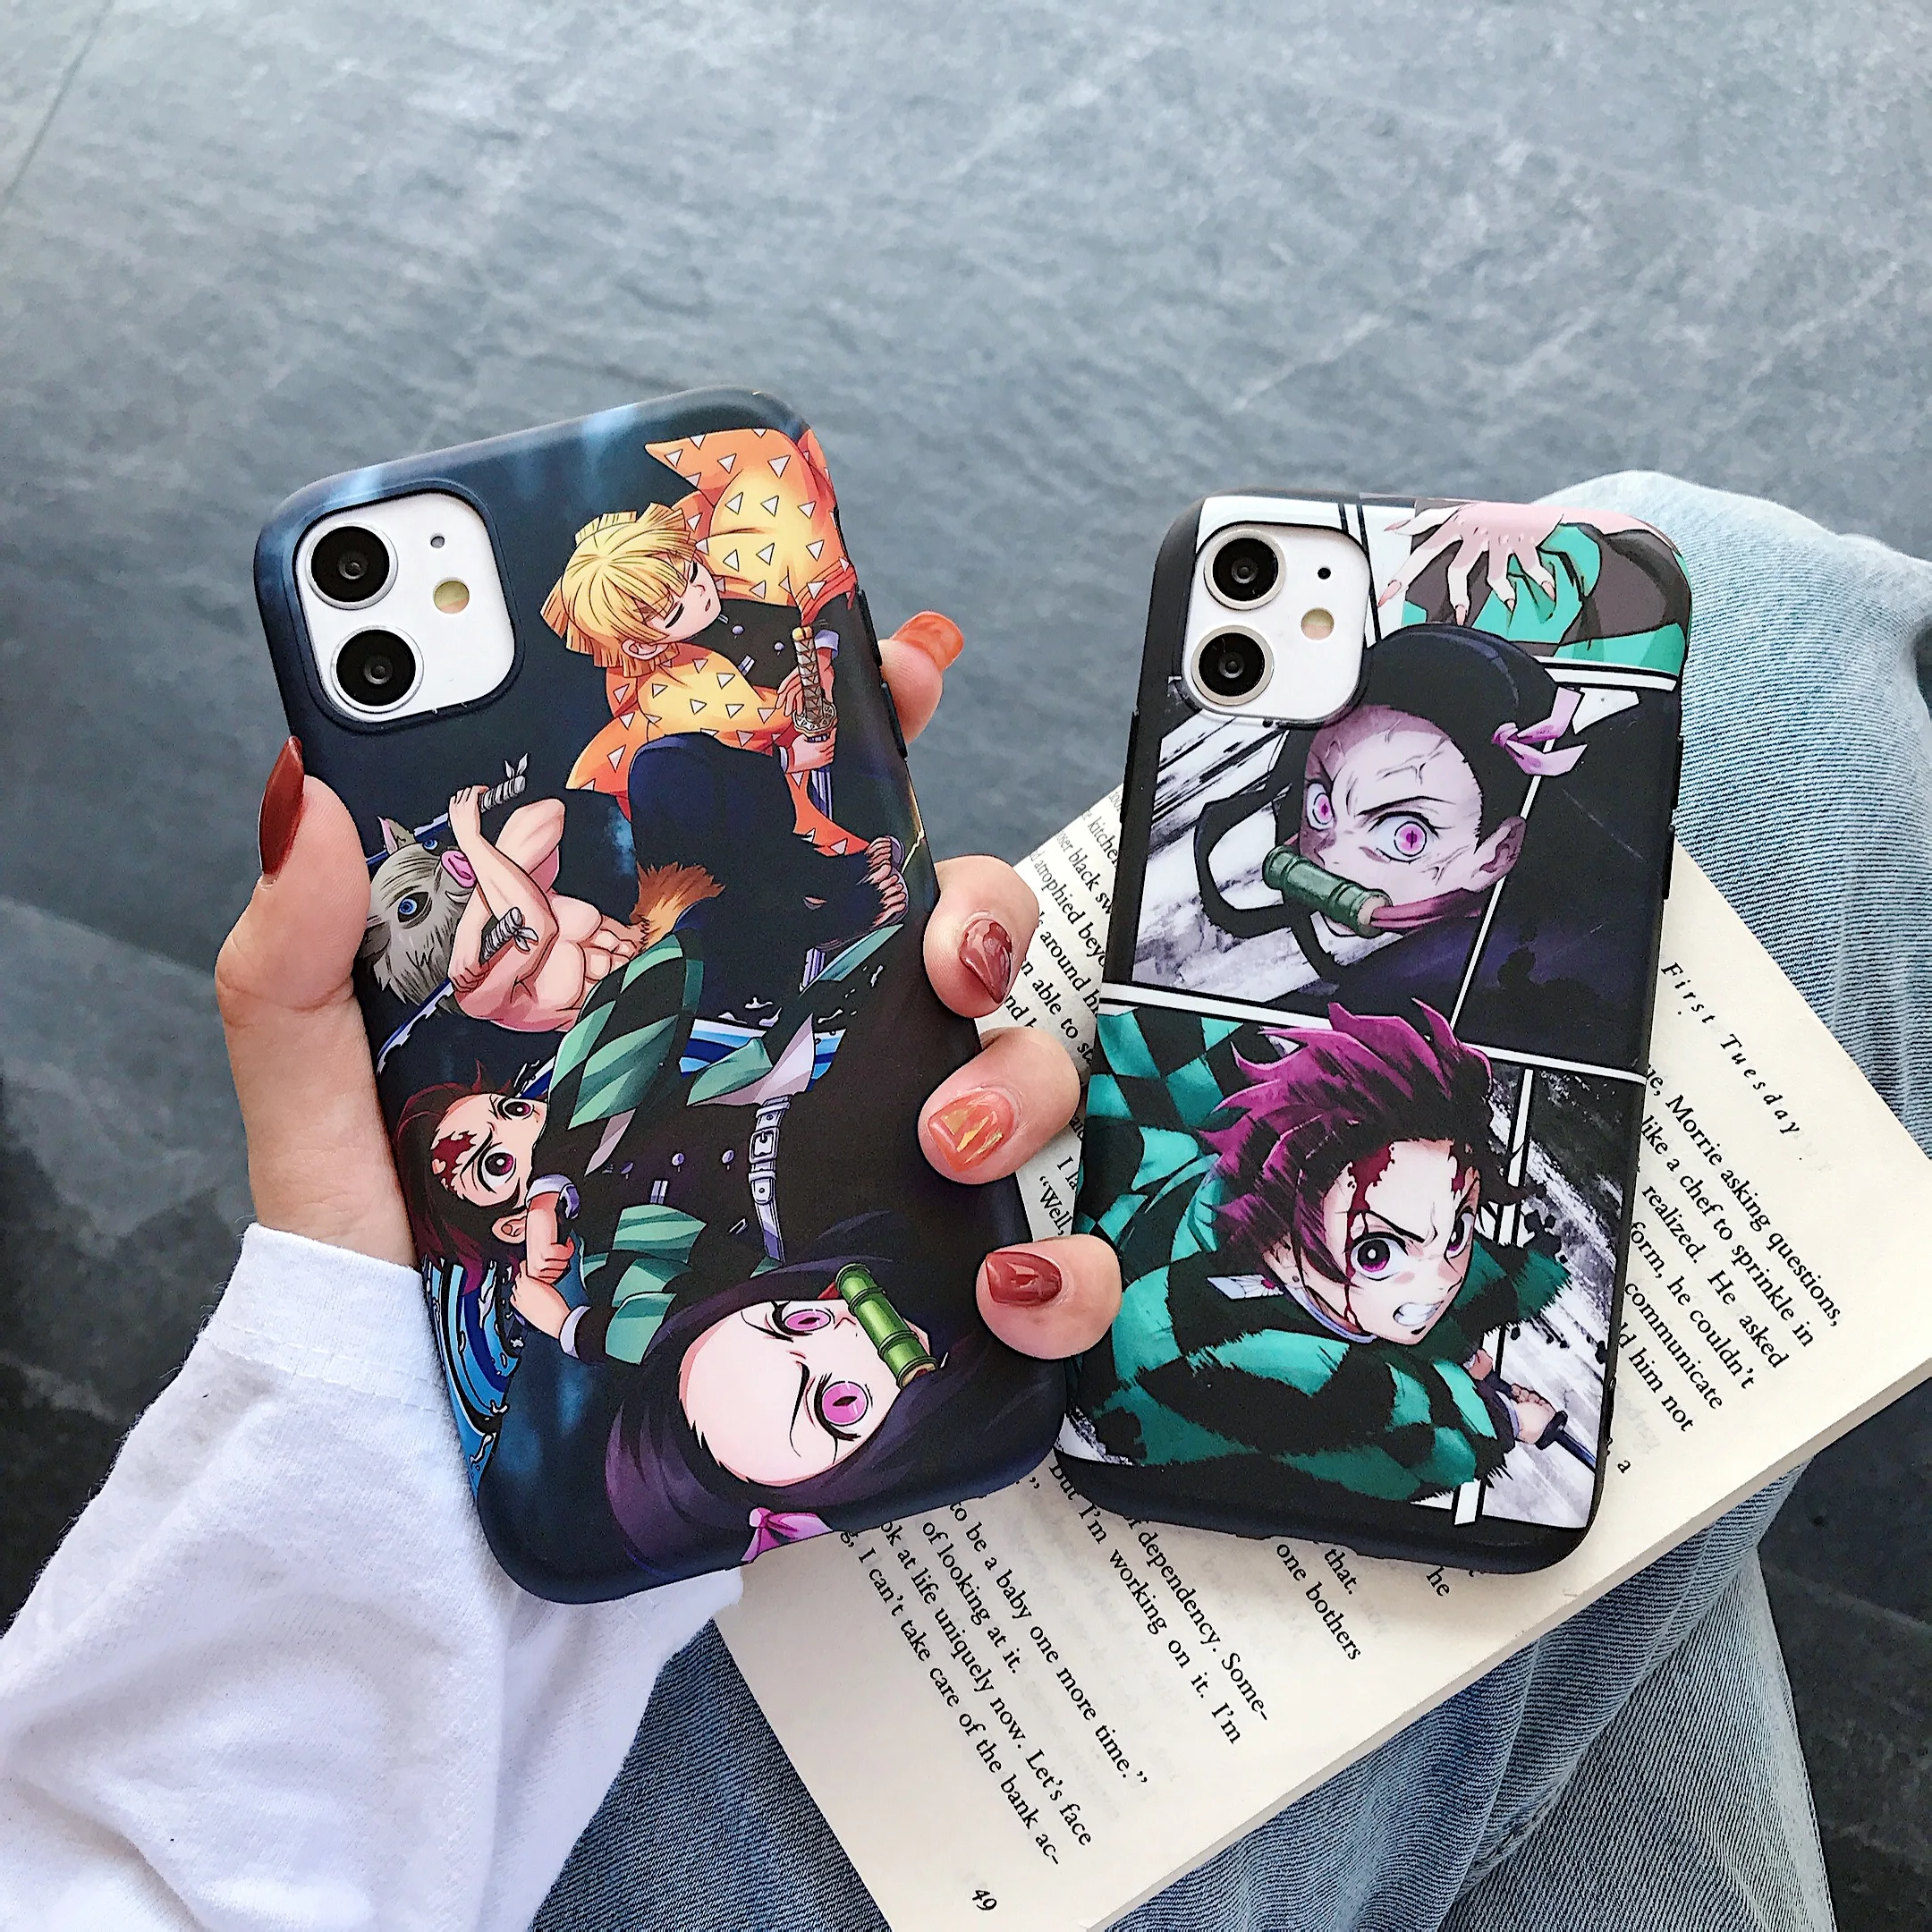 Cute Japan Demon Slayer Case For Iphone 11 12 13 Pro 7 8Plus X XR XS Max Phone Cases Anime Kimetsu No Yaiba Soft TPU Cover Coque iphone 13 pro max case clear